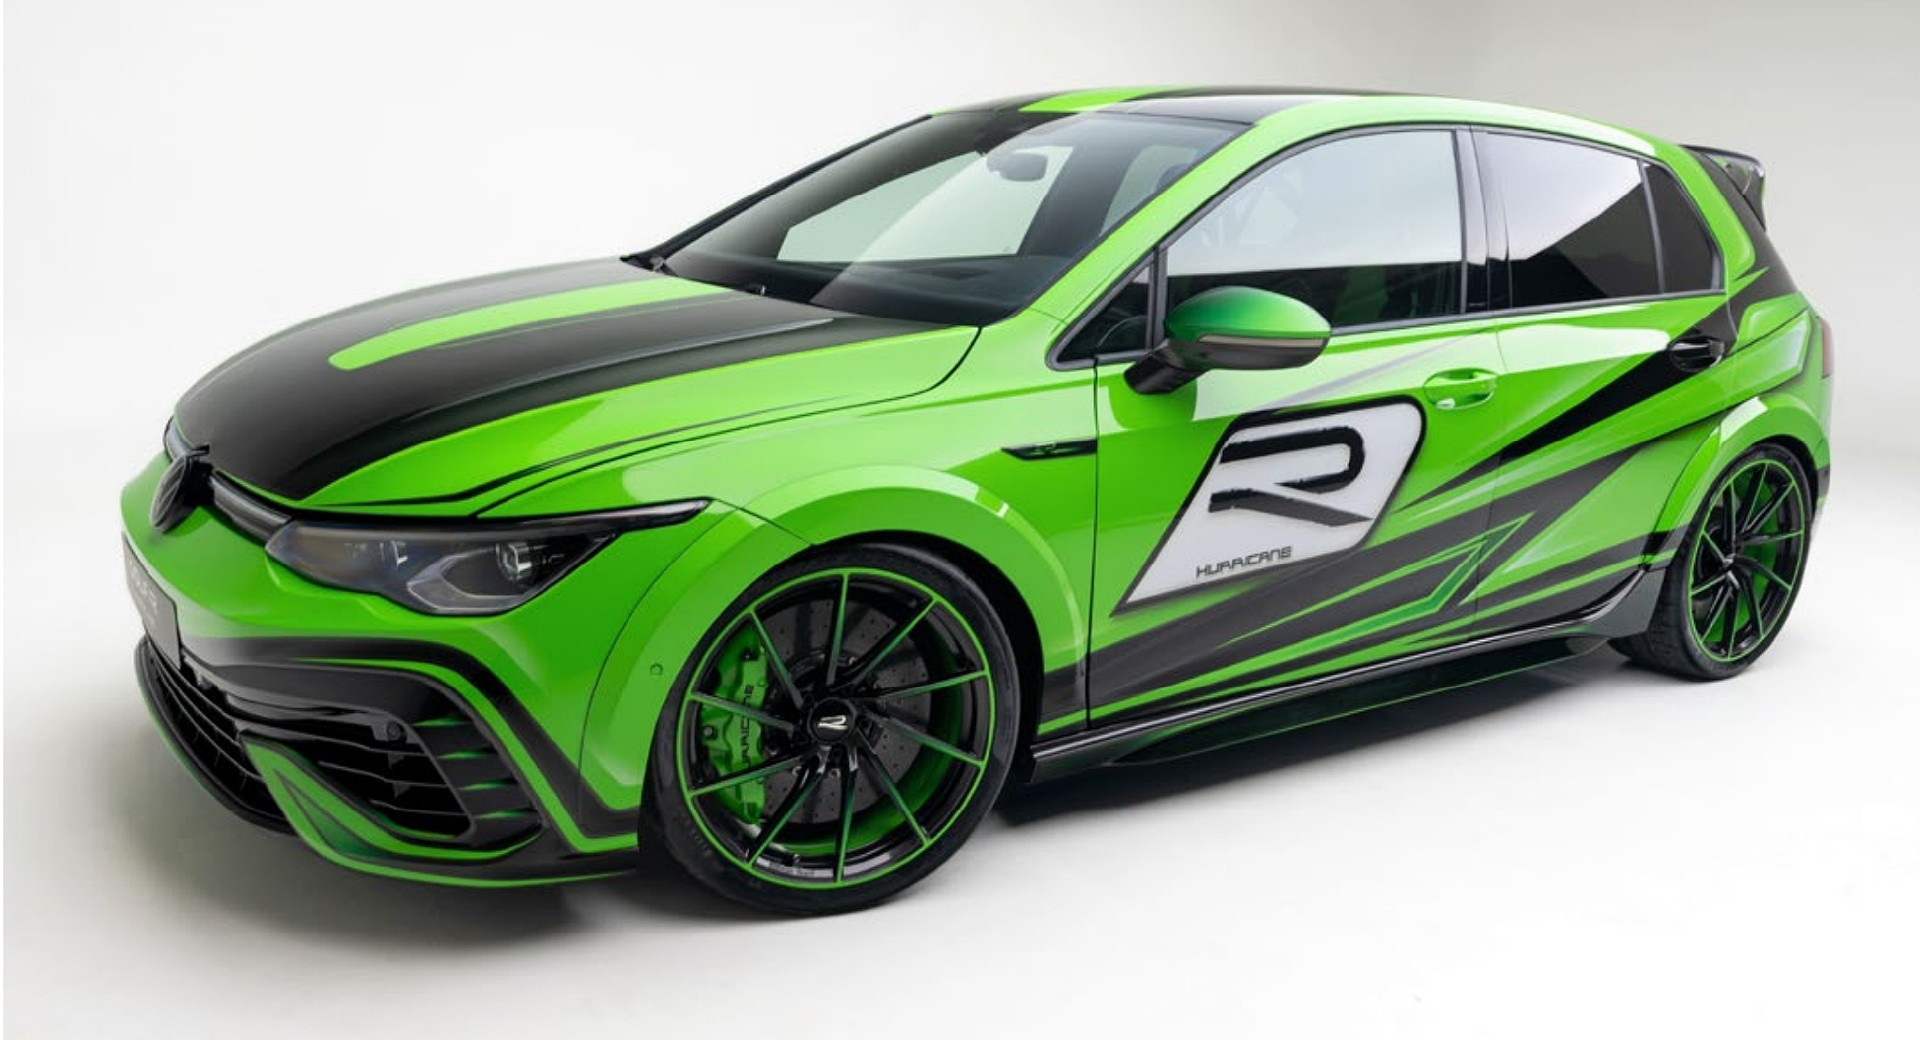 VW Golf R Hurricane Tuned By Apprentices Has Custom Livery, Wide ...